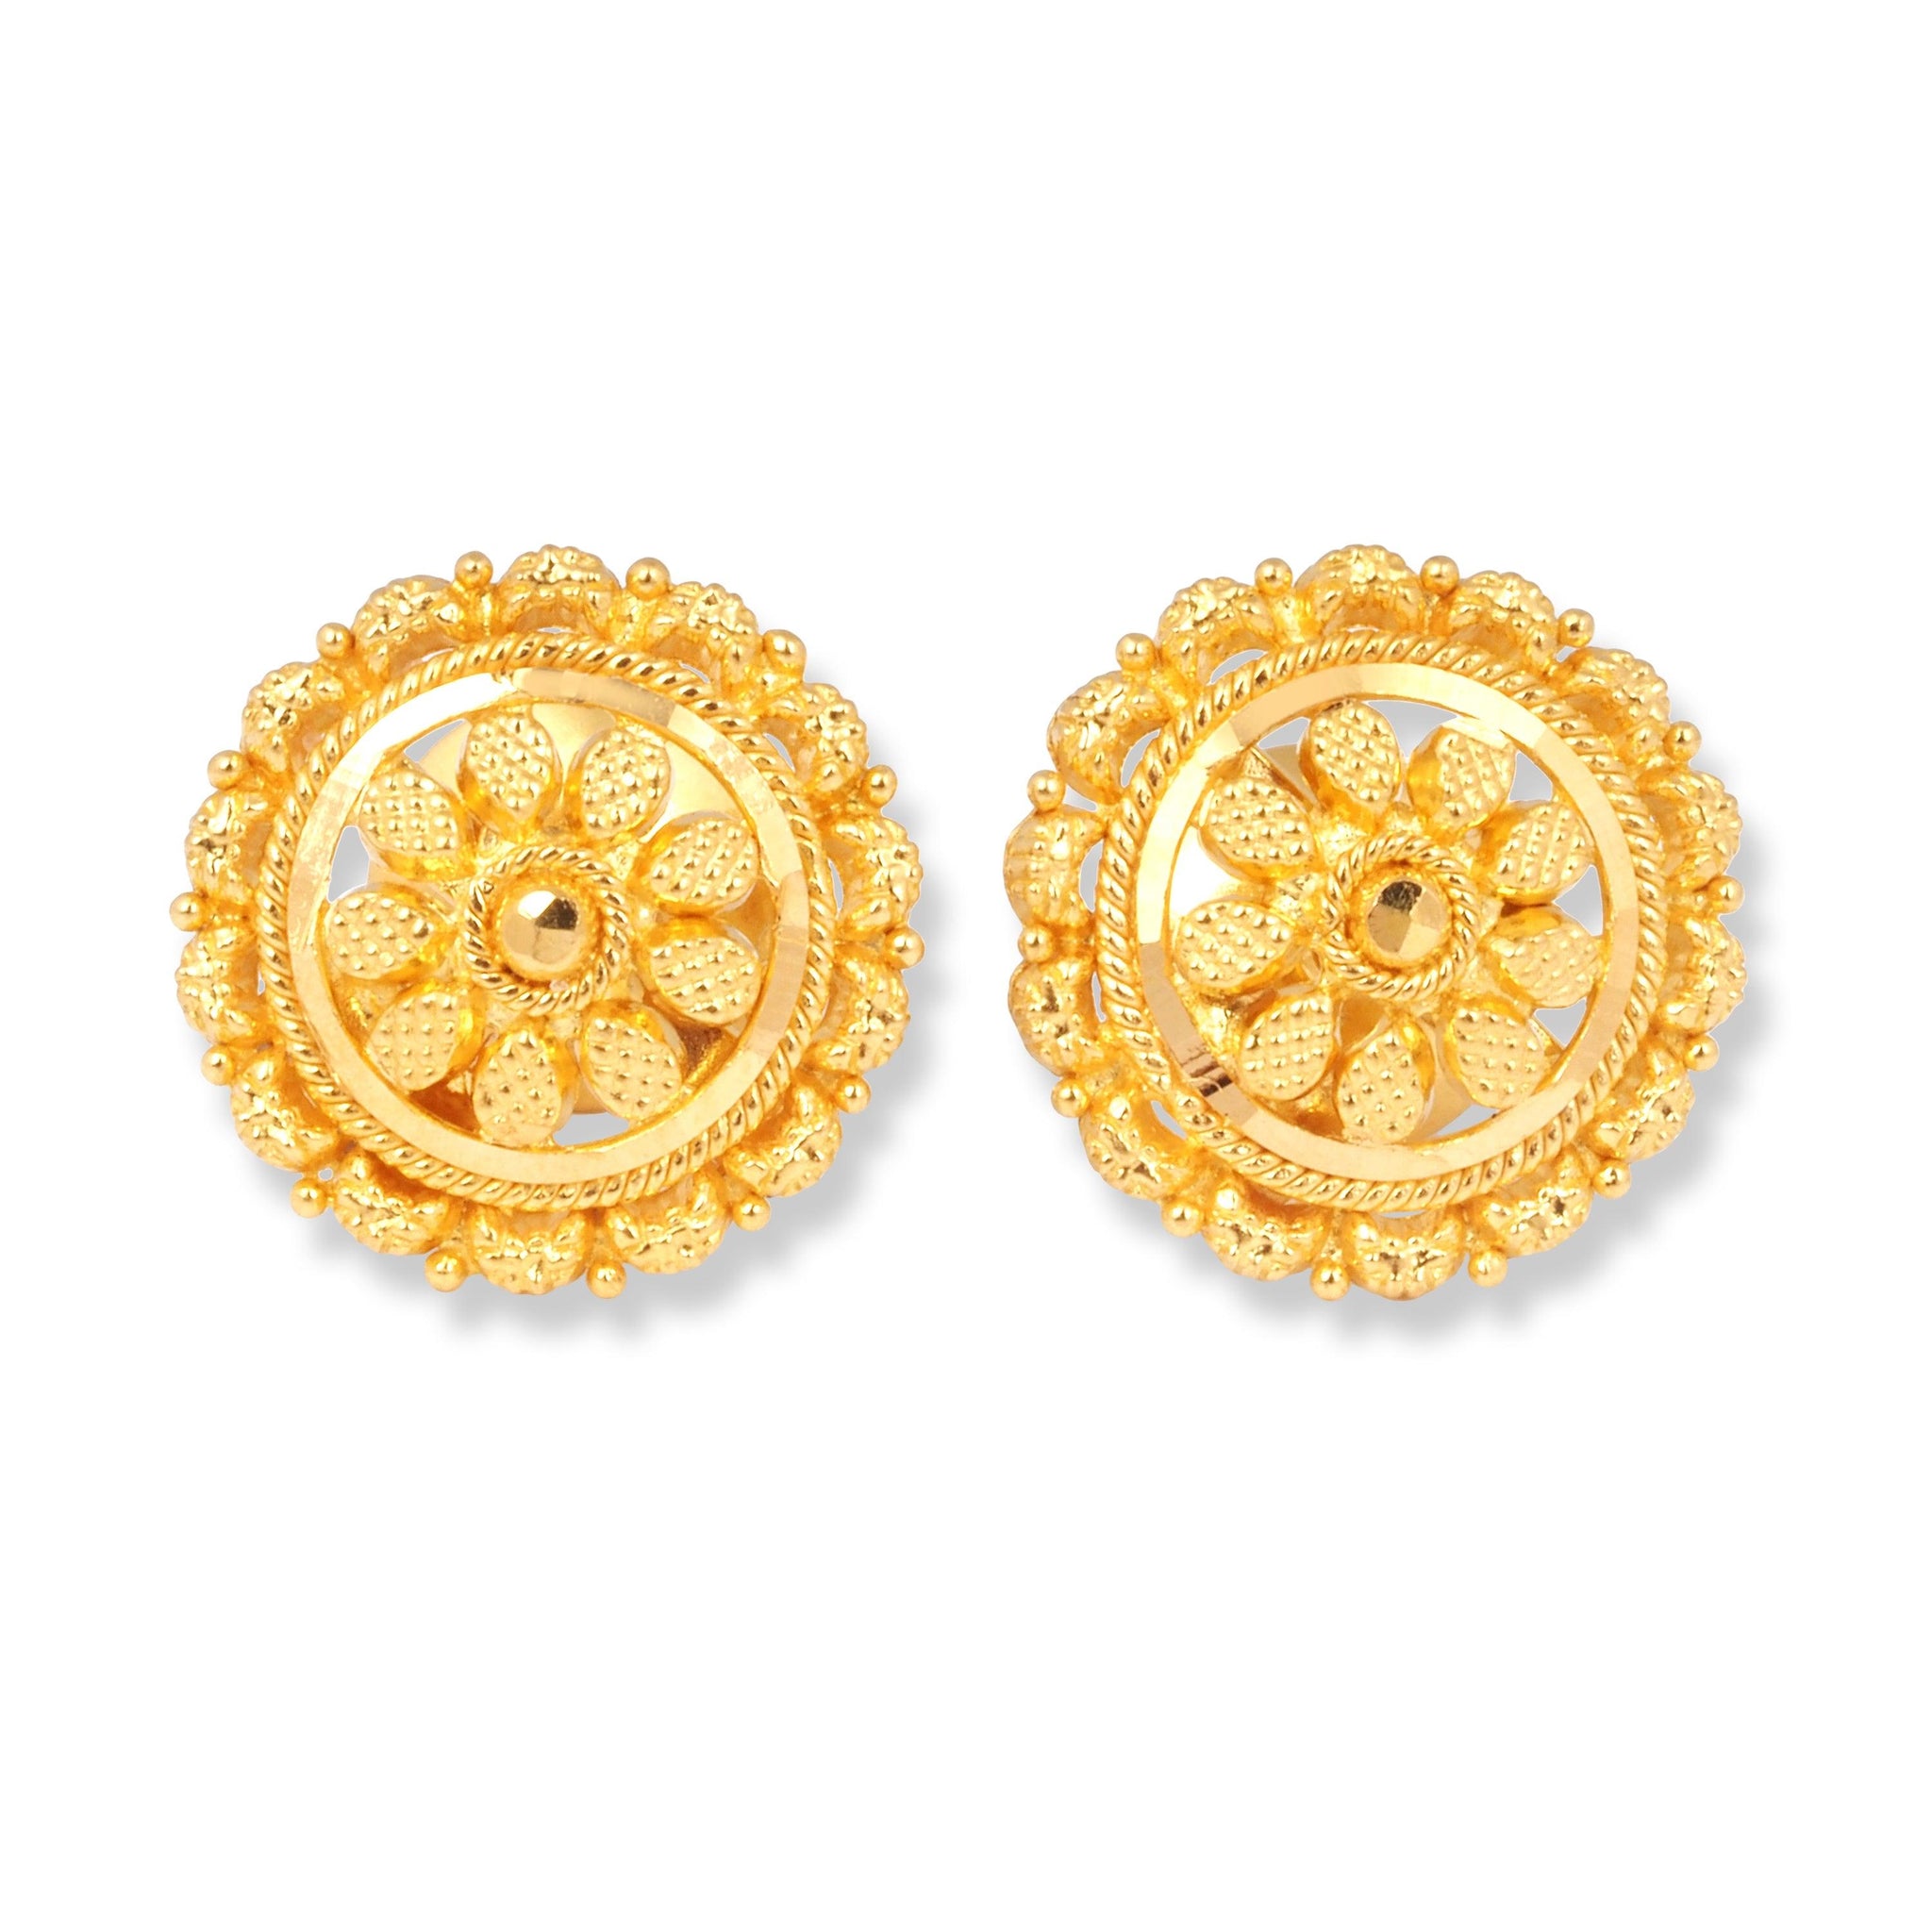 22ct Gold Earrings with Filigree Design (3.7g) E-7883